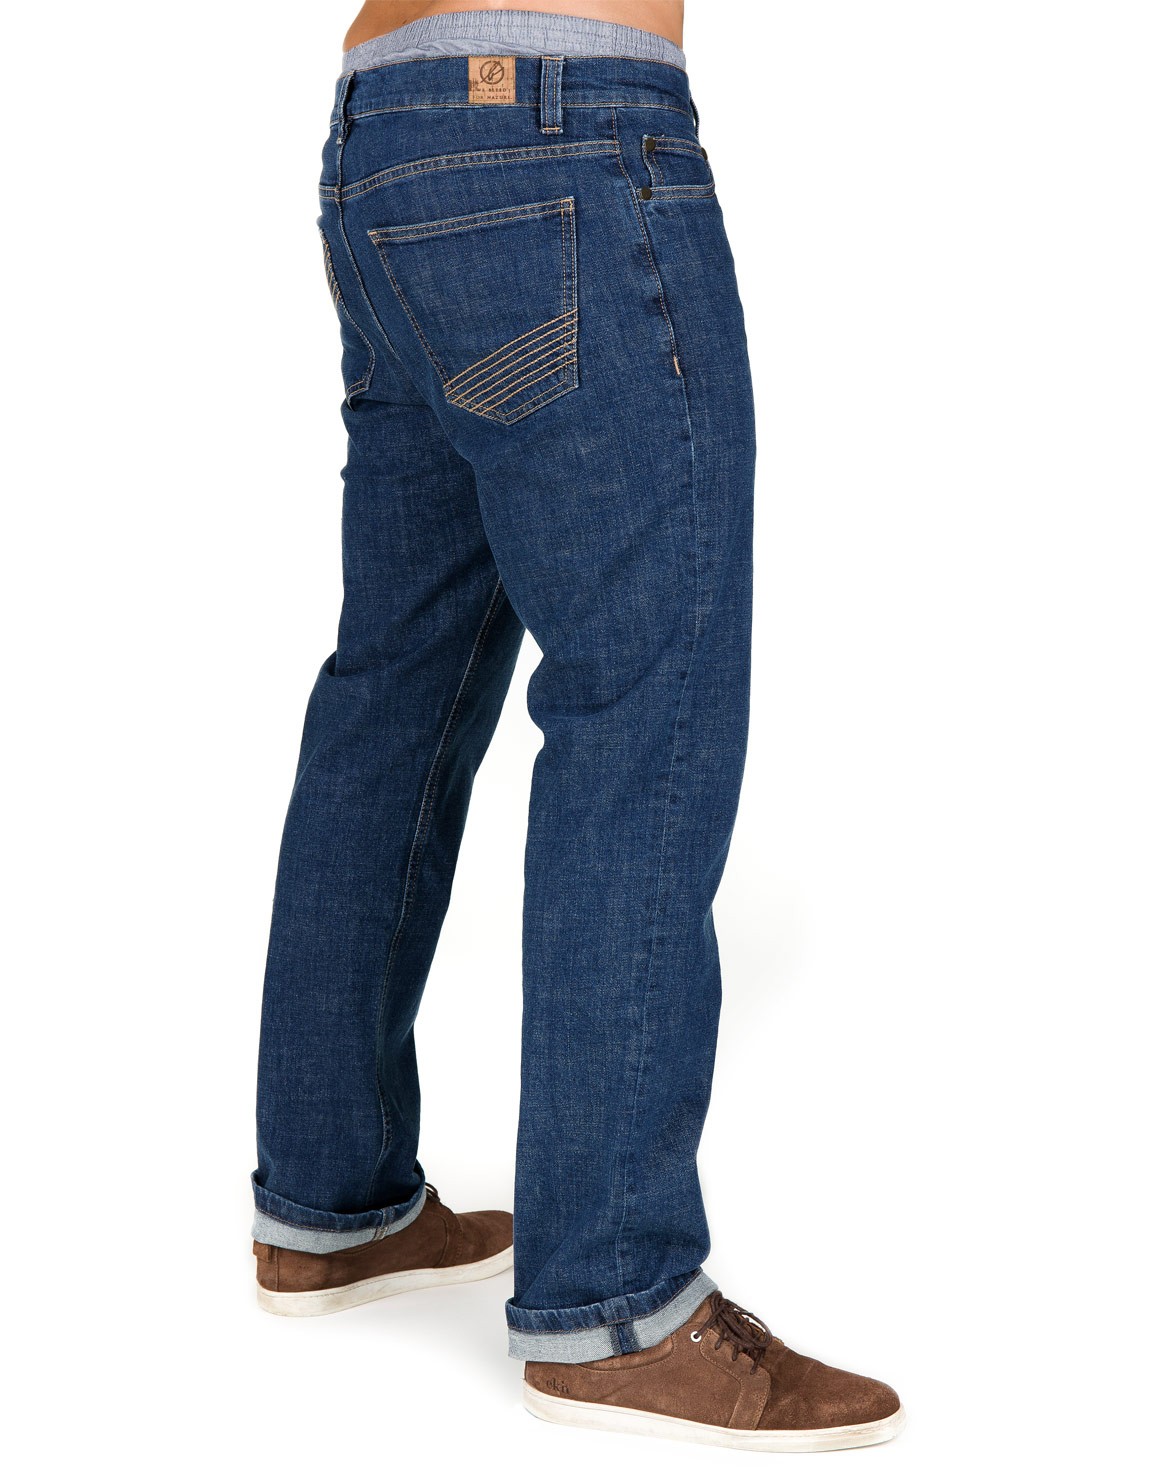 Functional Jeans